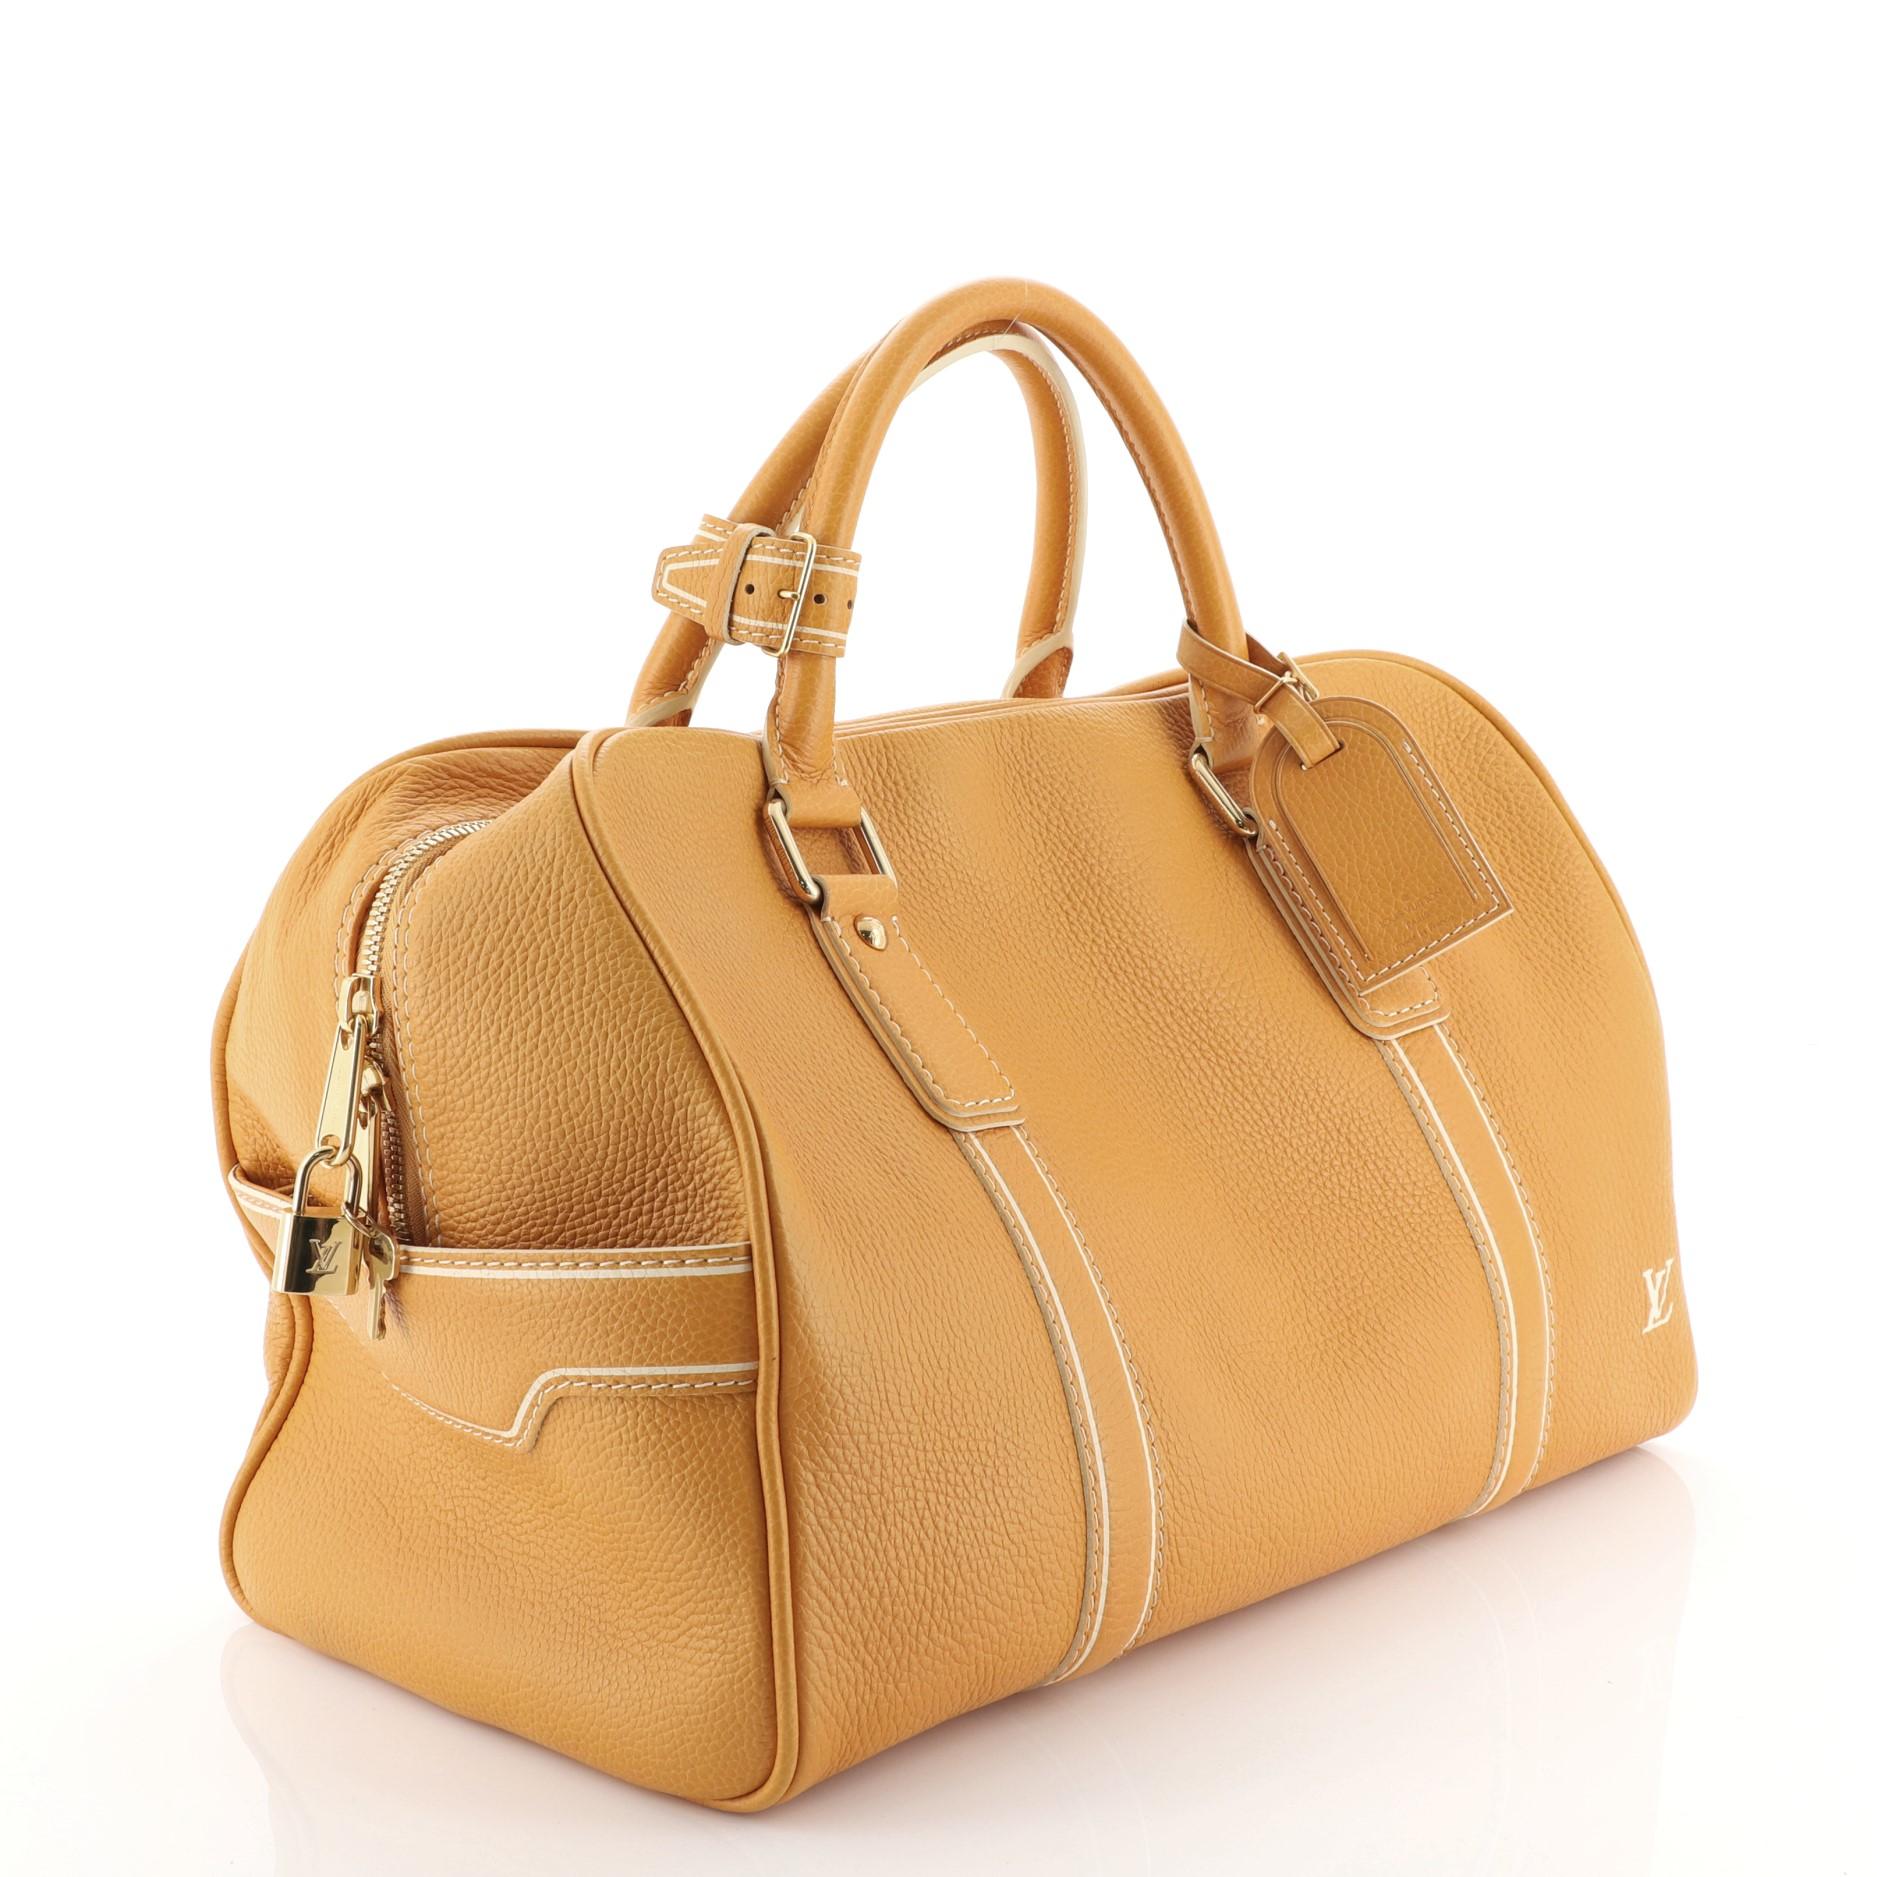 This Louis Vuitton Carryall Handbag Tobago Leather, crafted in orange tobago leather, features dual rolled handles and gold-tone hardware. Its zip closure opens to a brown fabric interior. Authenticity code reads: TH0016. 

Estimated Retail Price: